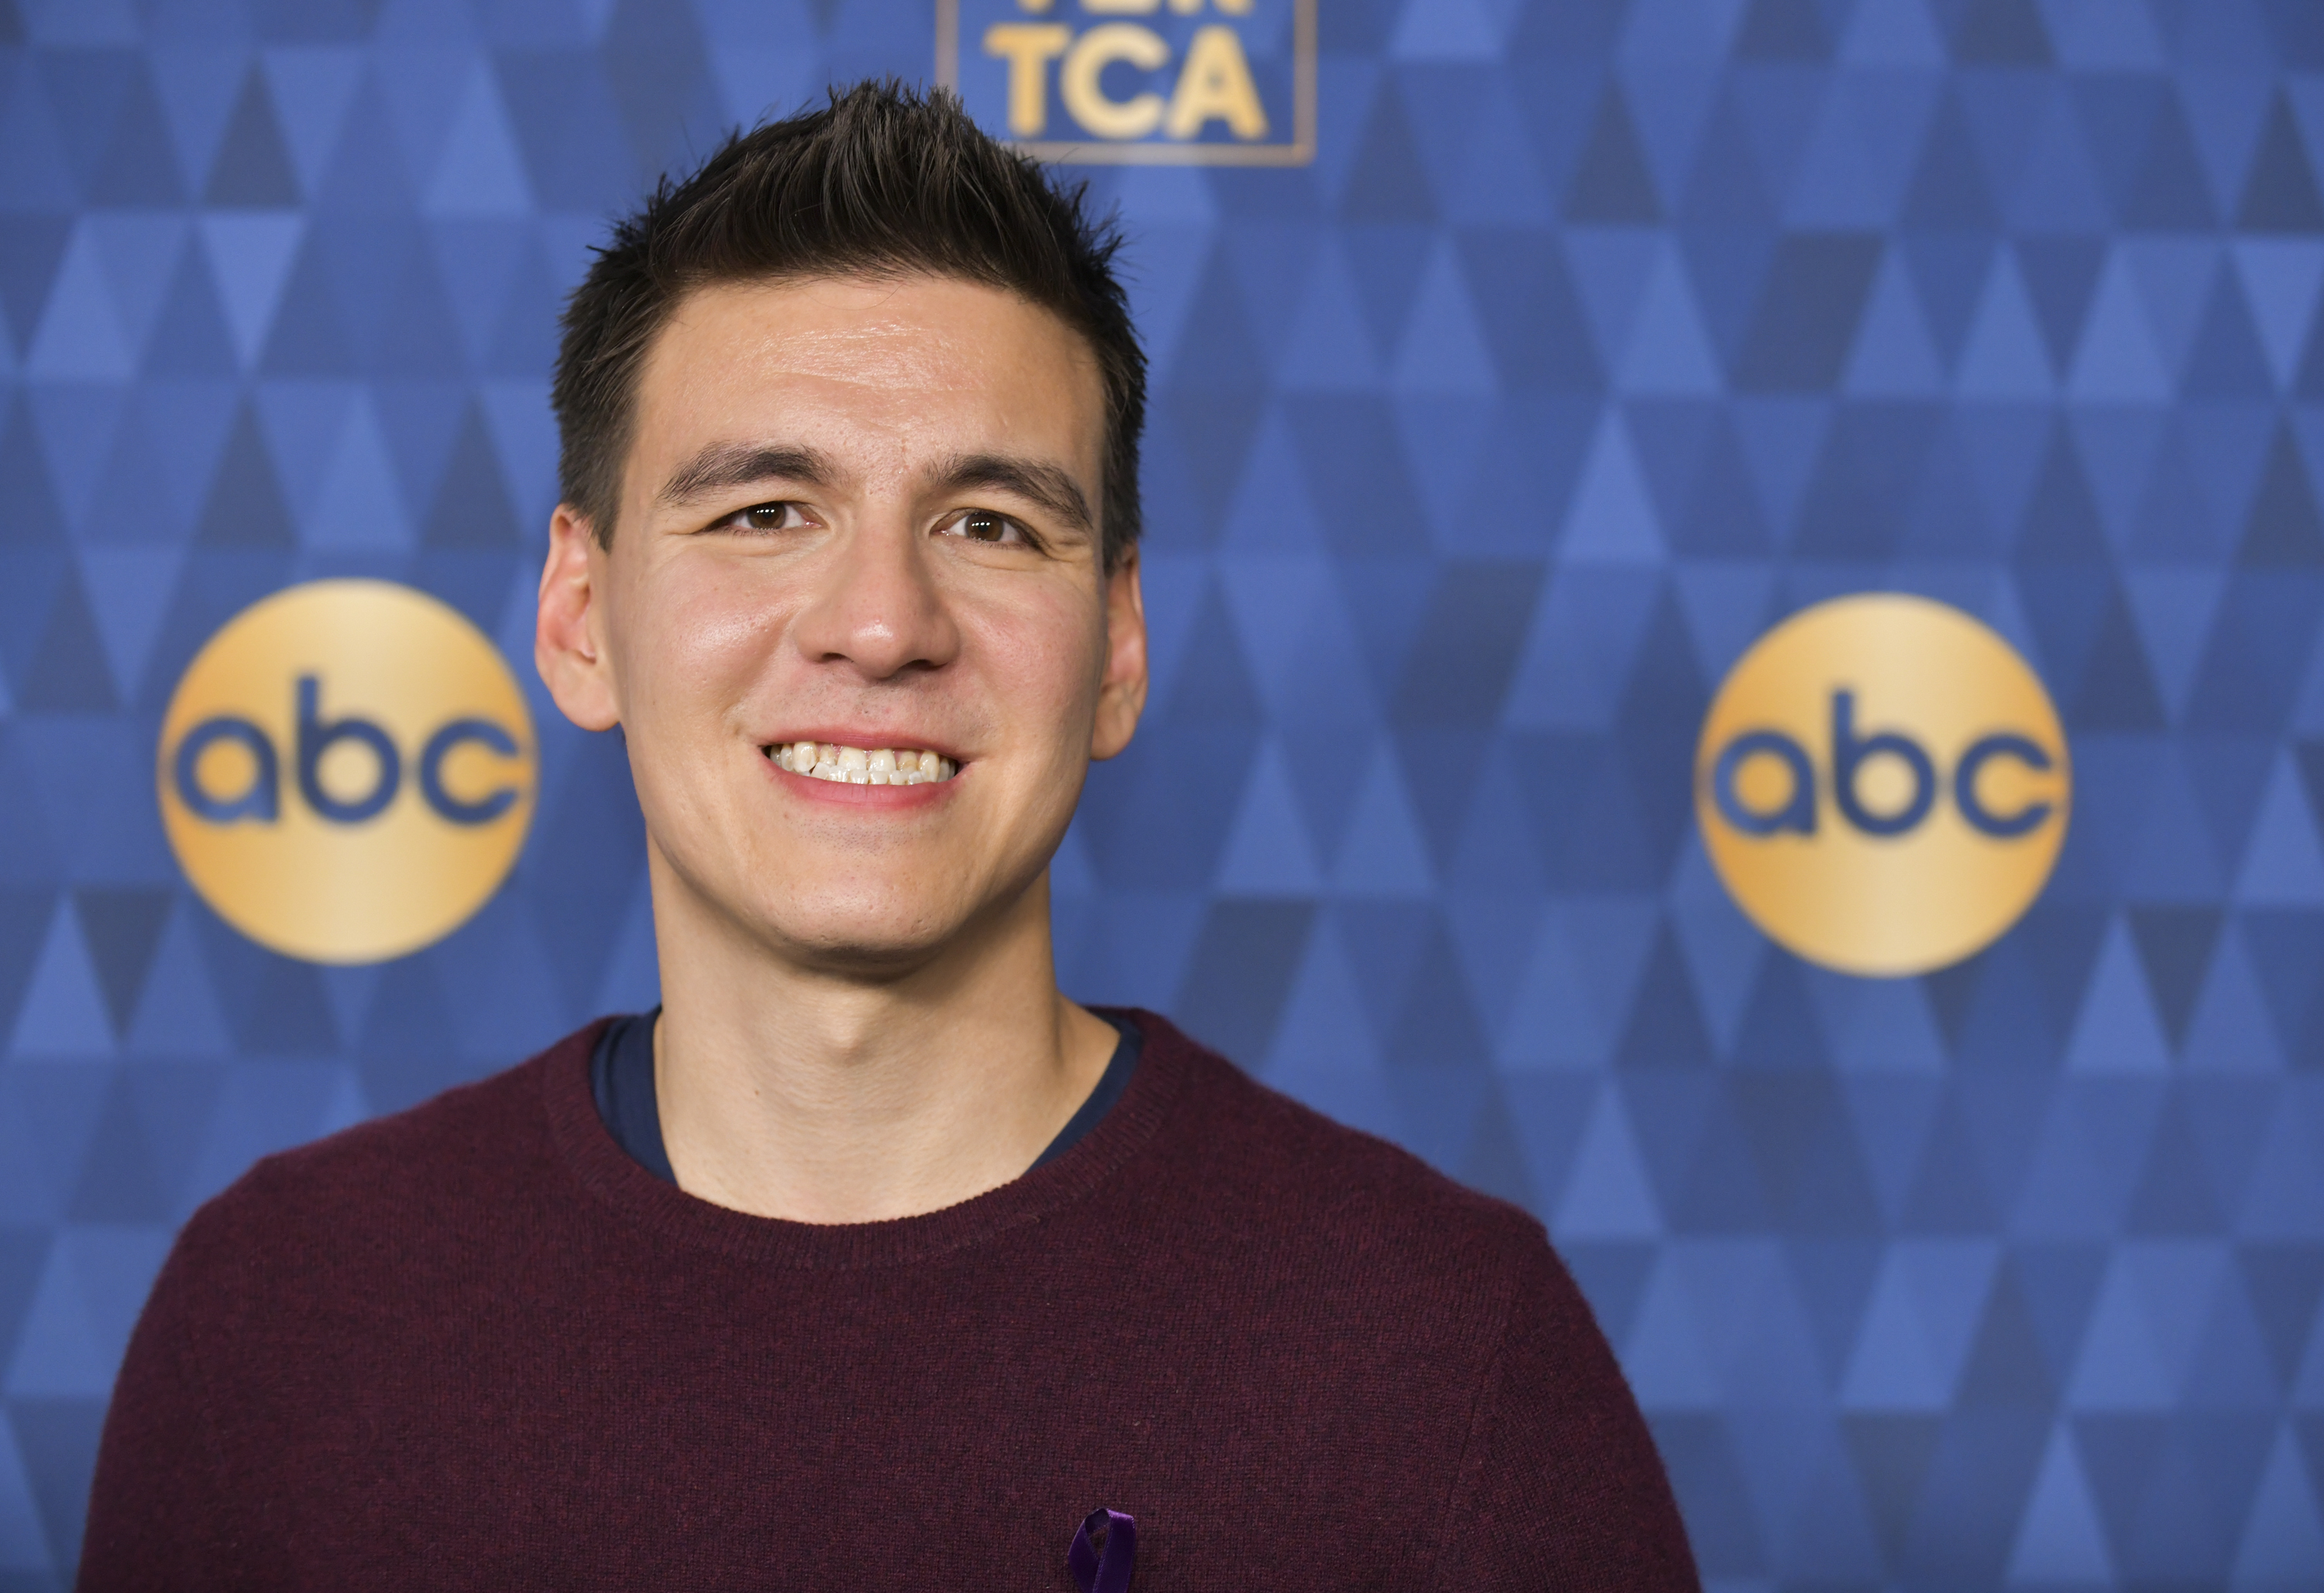 “Jeopardy!”s James Holzhauer roasts “Wheel of Fortune” on new host—”Savage”